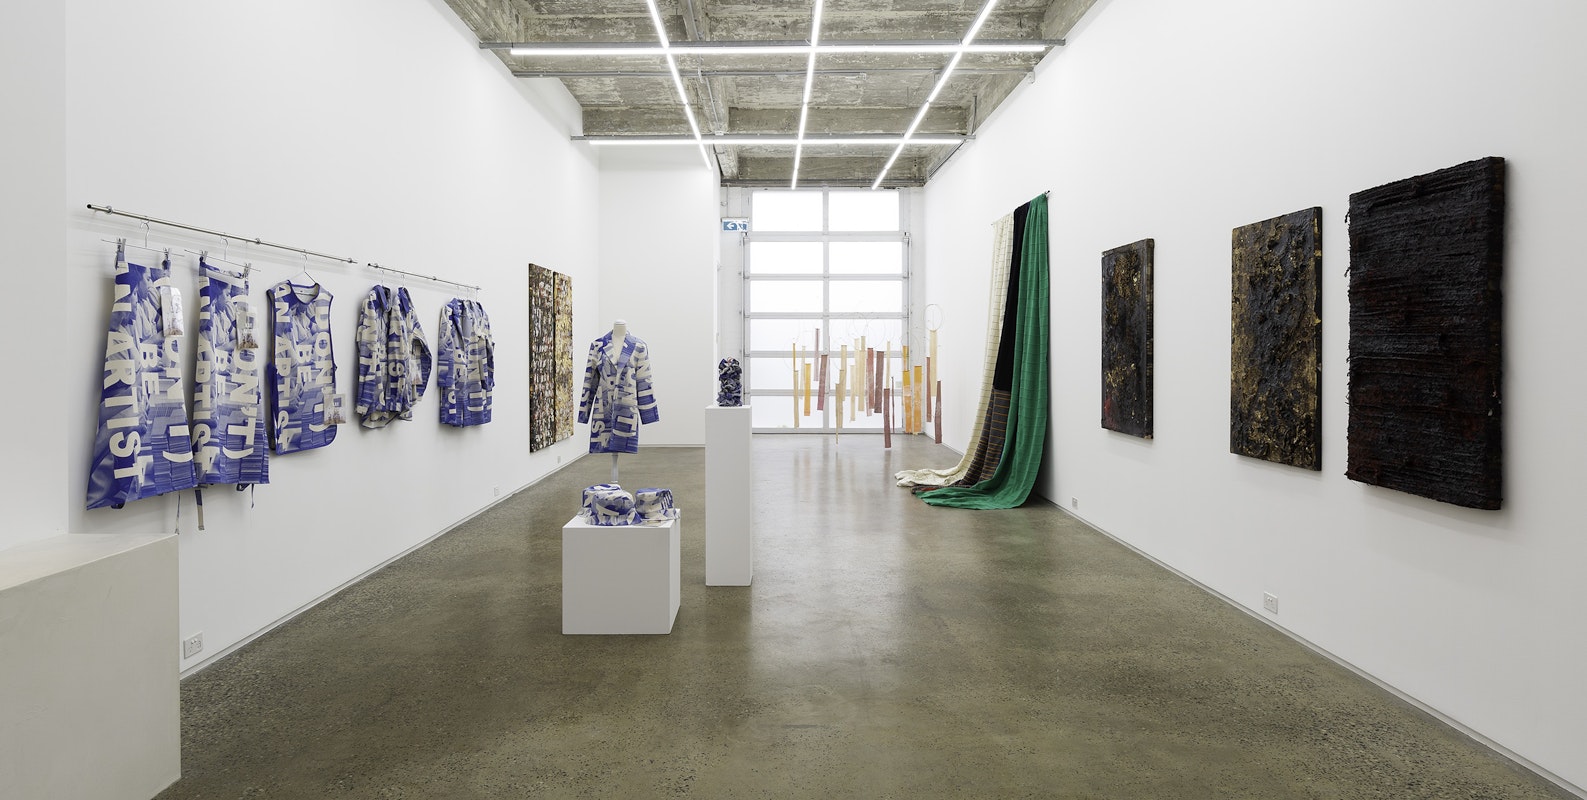 Installation view of 'Empty Pockets', curated by Sineenart Meena, featuring work by Kay Abude, Kirtika Kain, Linda Sok and James Nguyen at Gertrude Glasshouse. Photo: Christian Capurro.